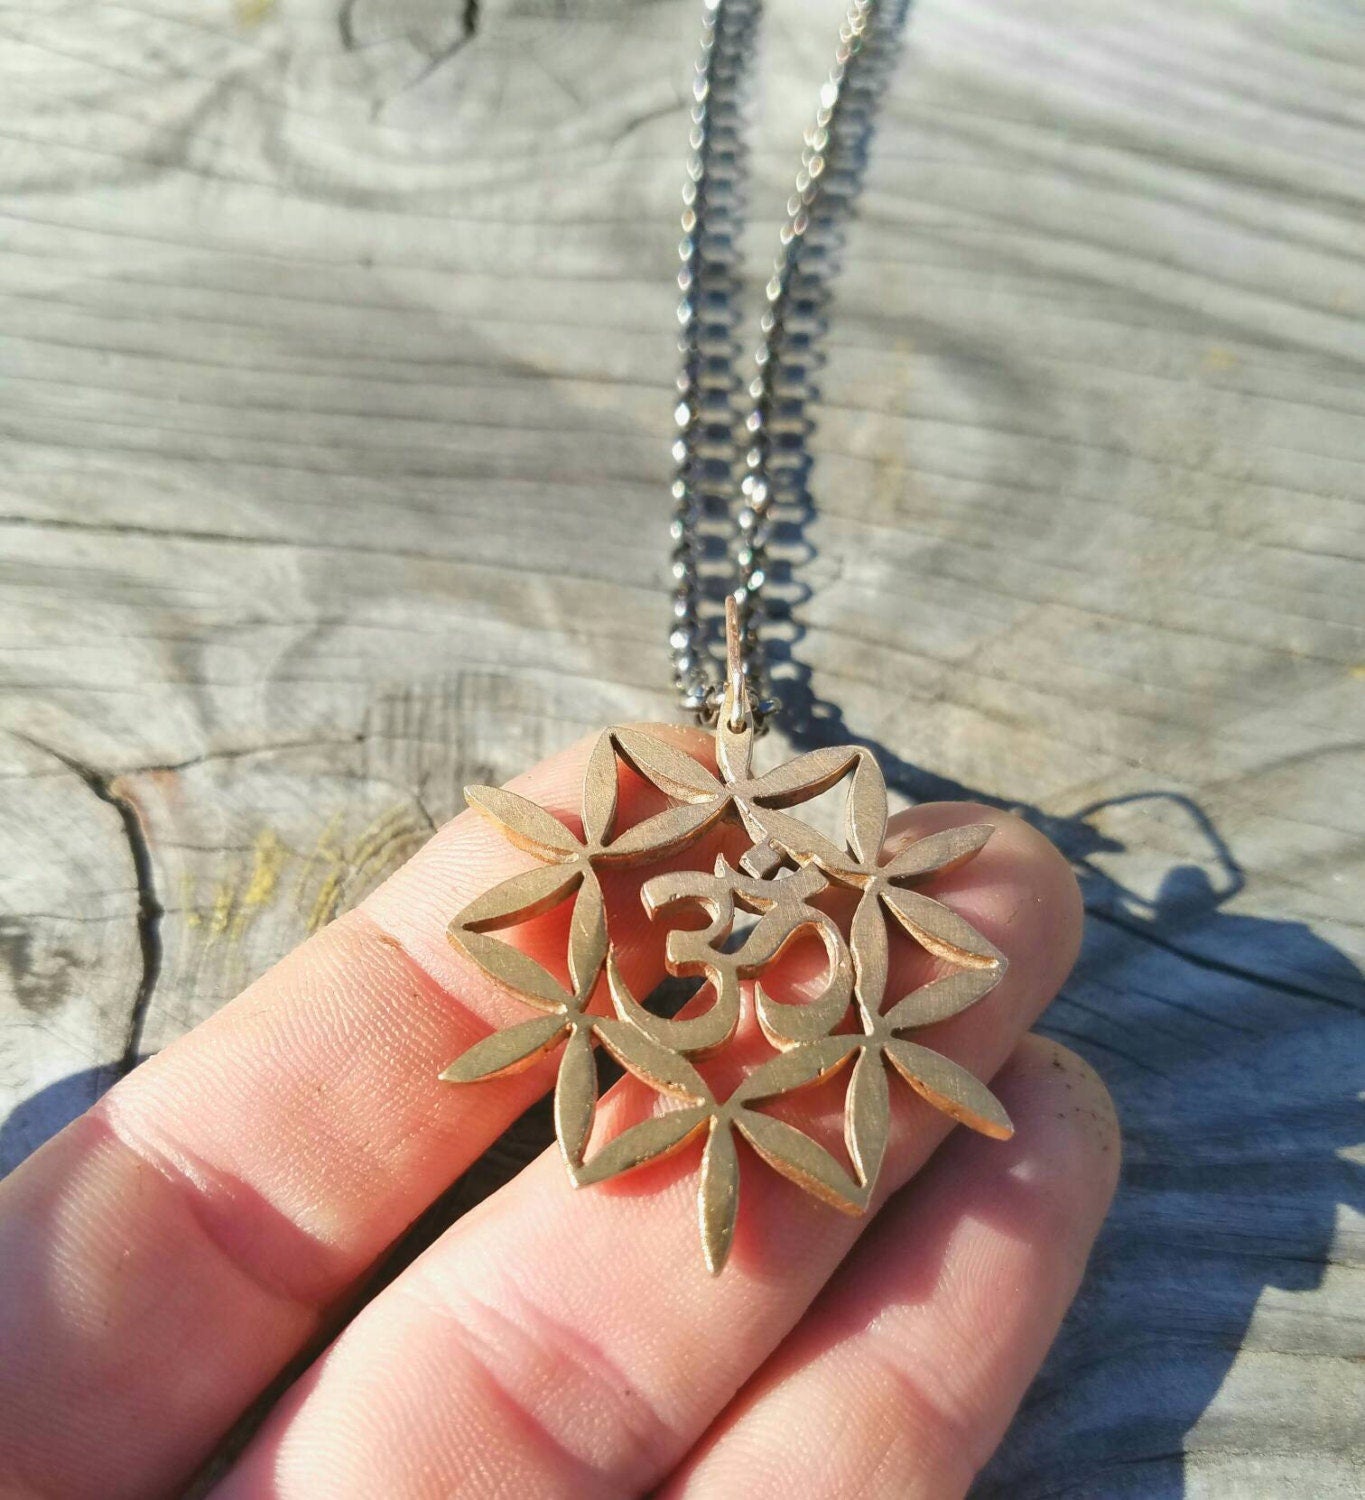 Om and Flower of Life Pendant - Sacred Geometry